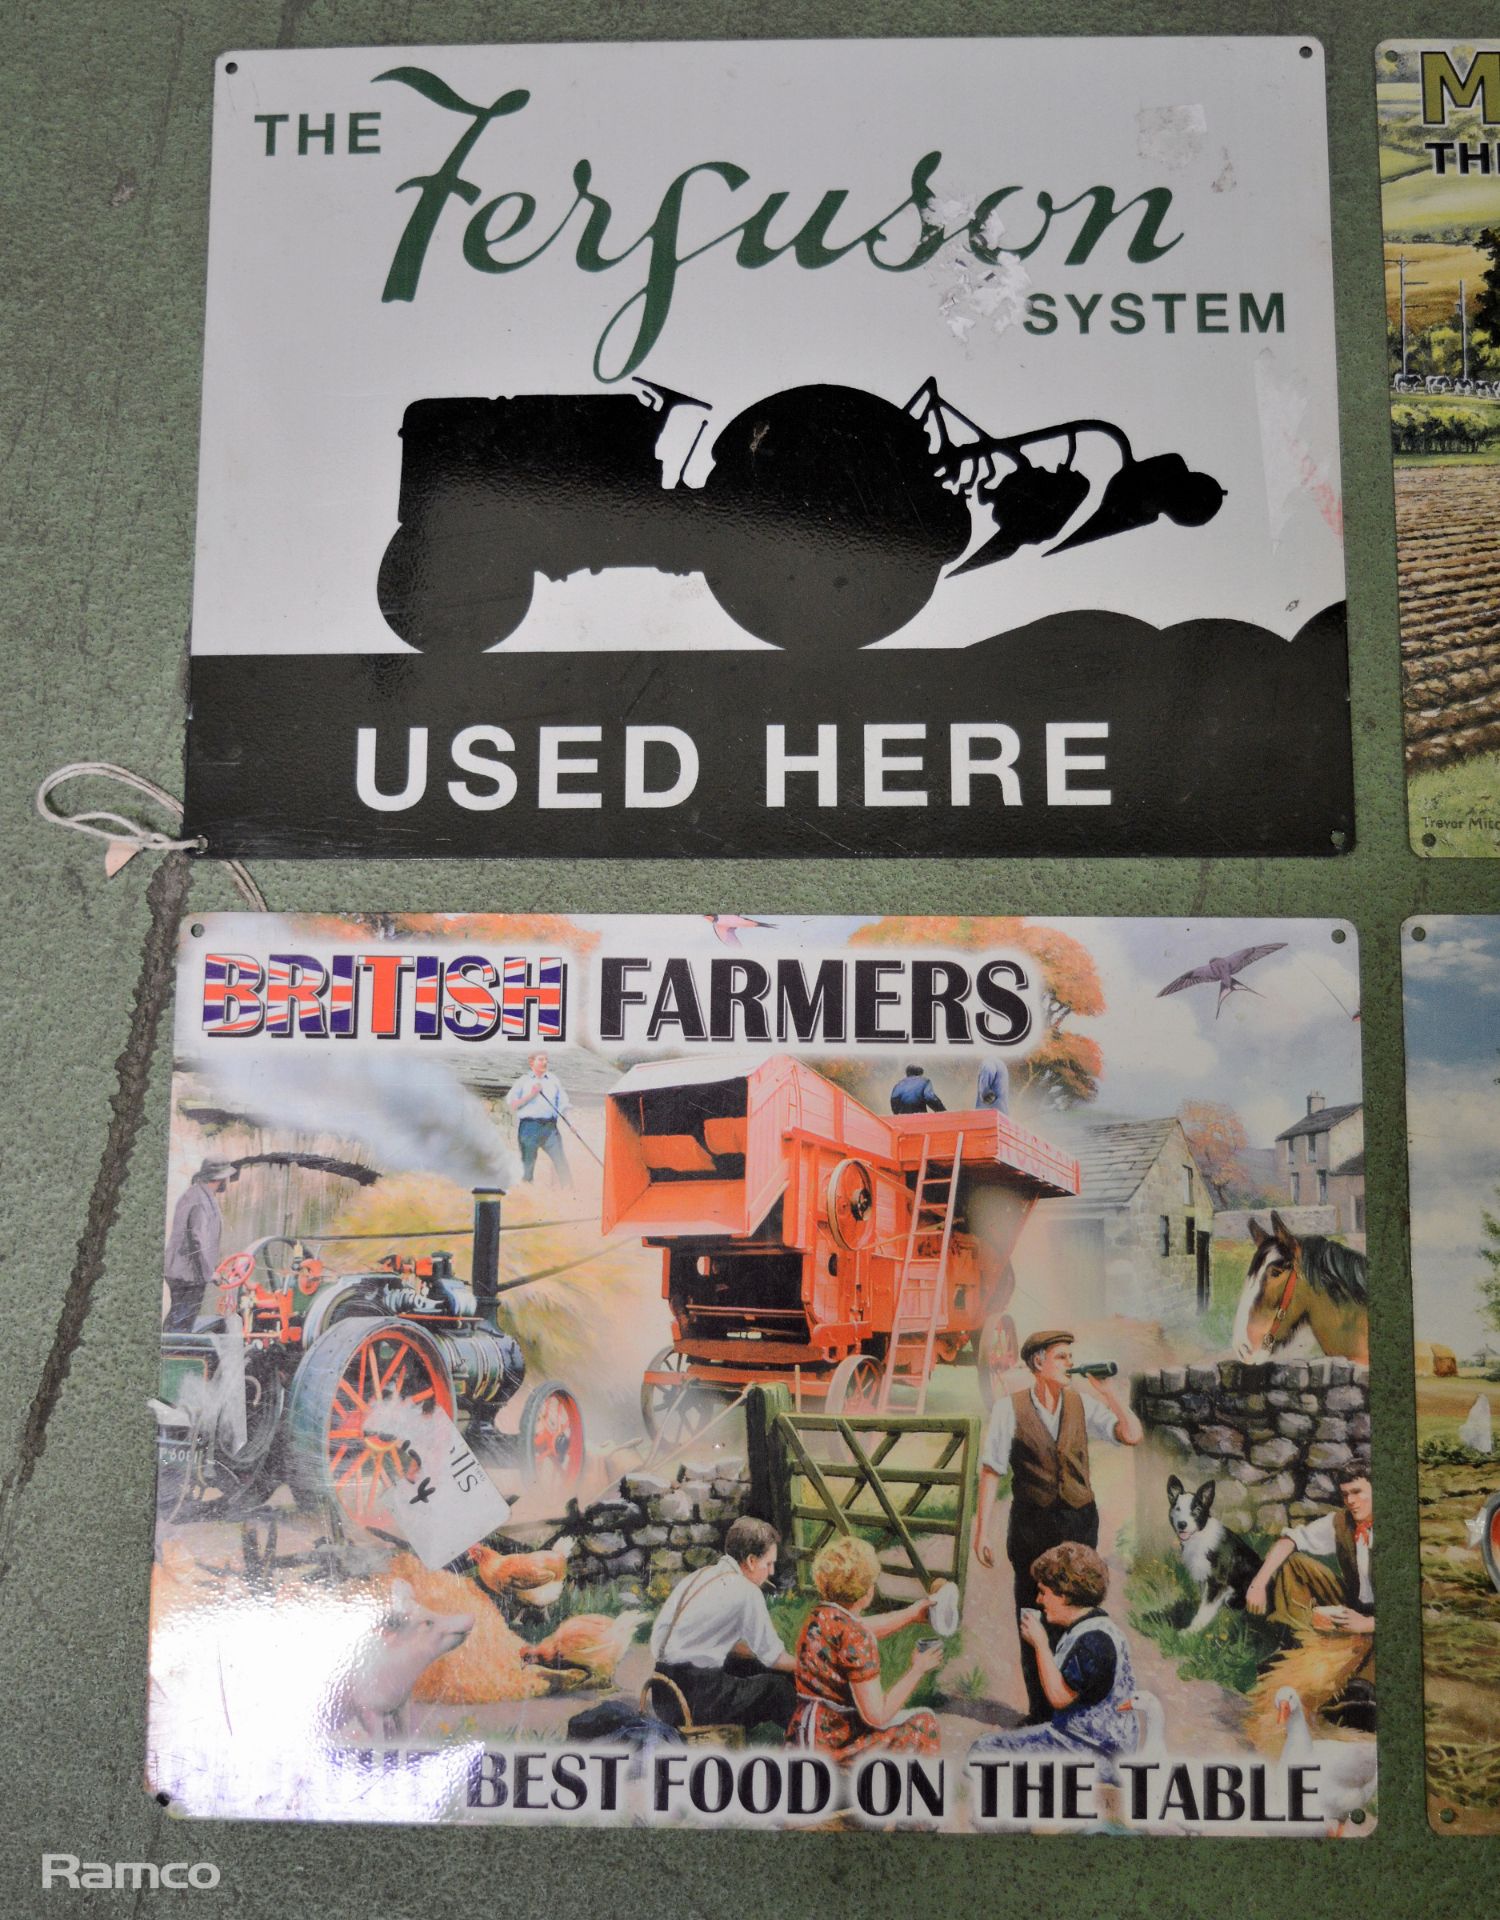 4x 400mm x 300mm tin signs - British Farmers, Fordson Tractors, Master at work & The Ferguson system - Image 2 of 3